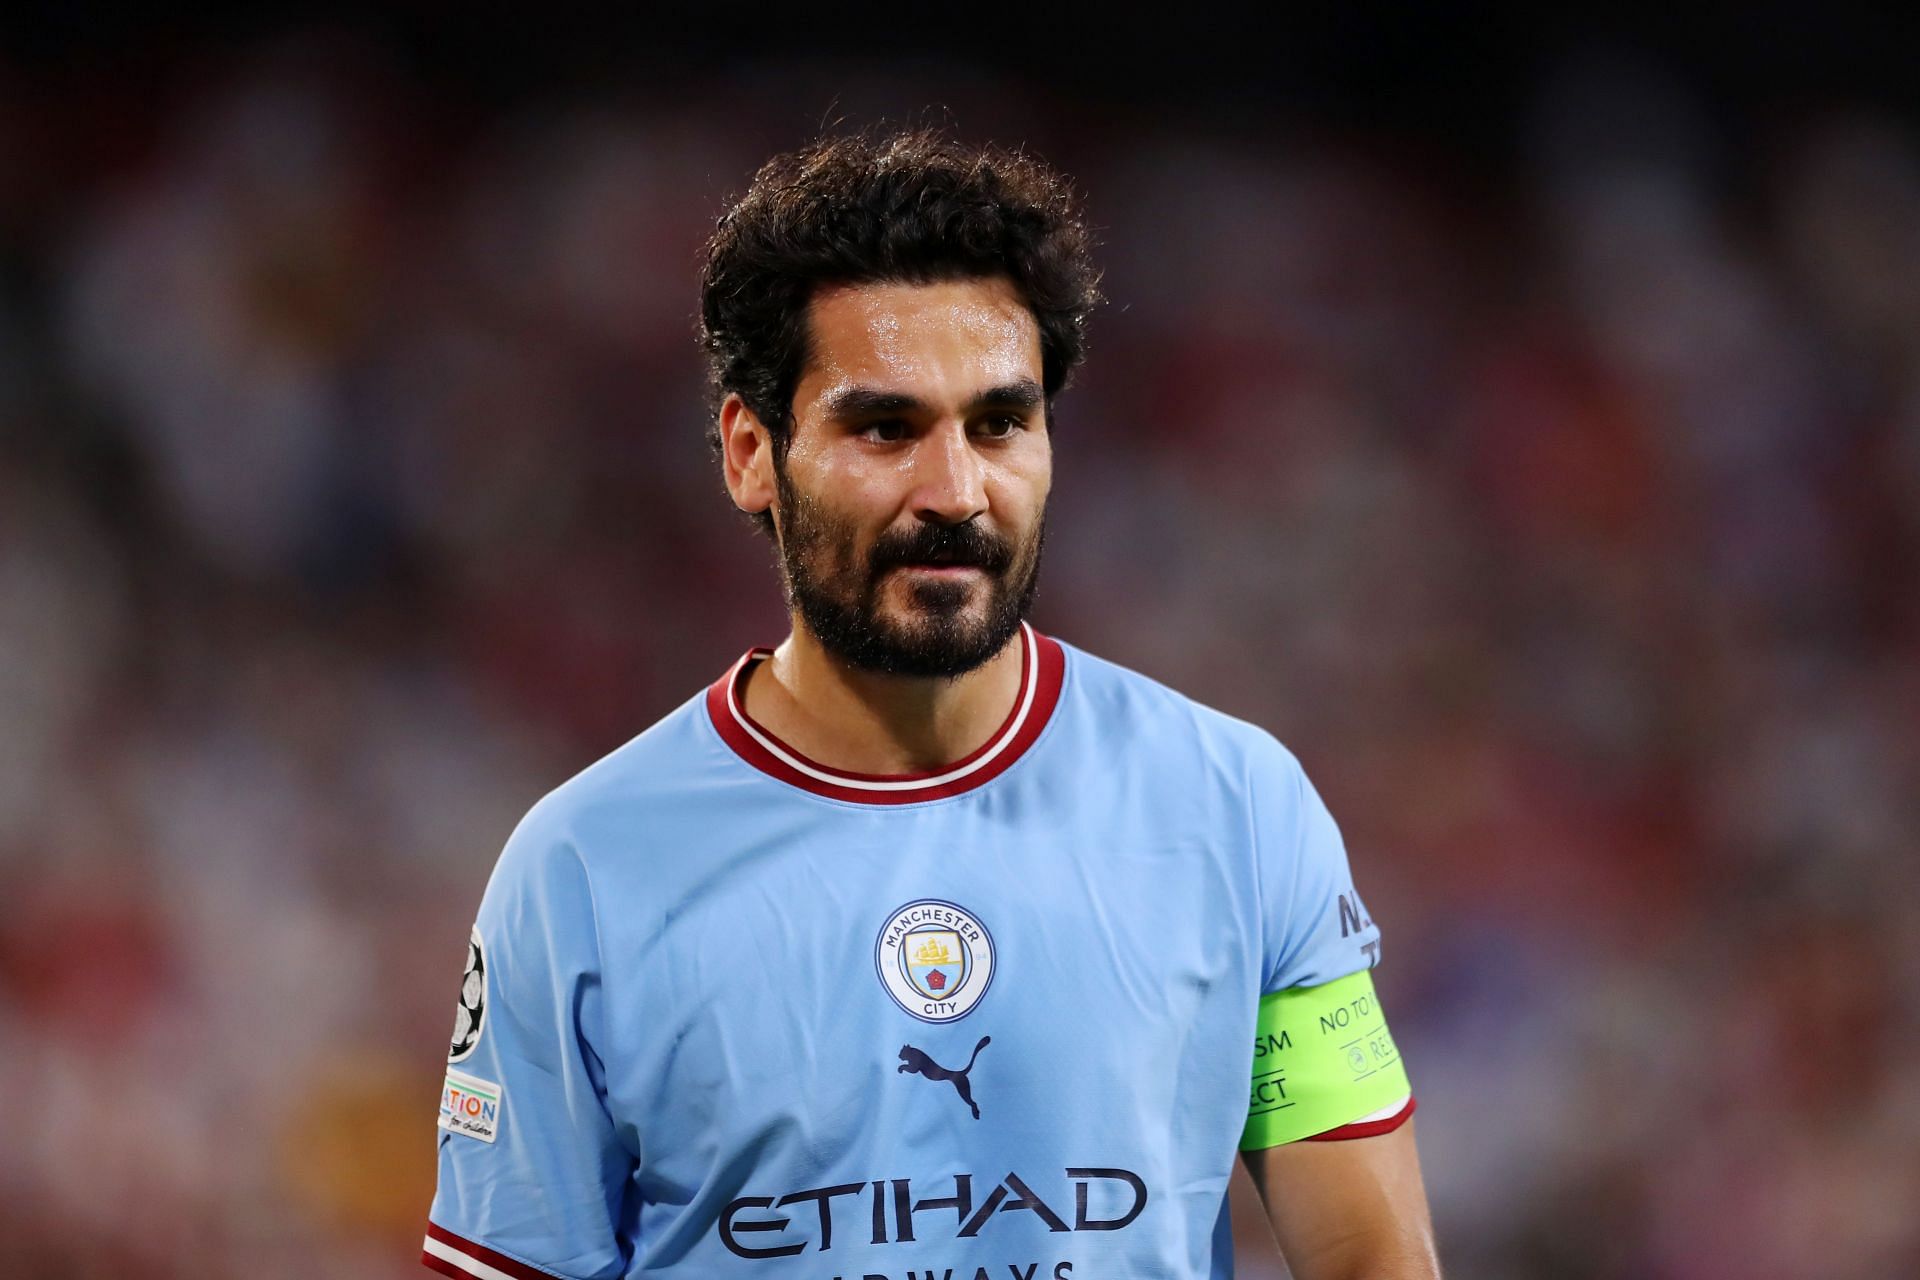 5 best players at Manchester City at the moment (September 2022)